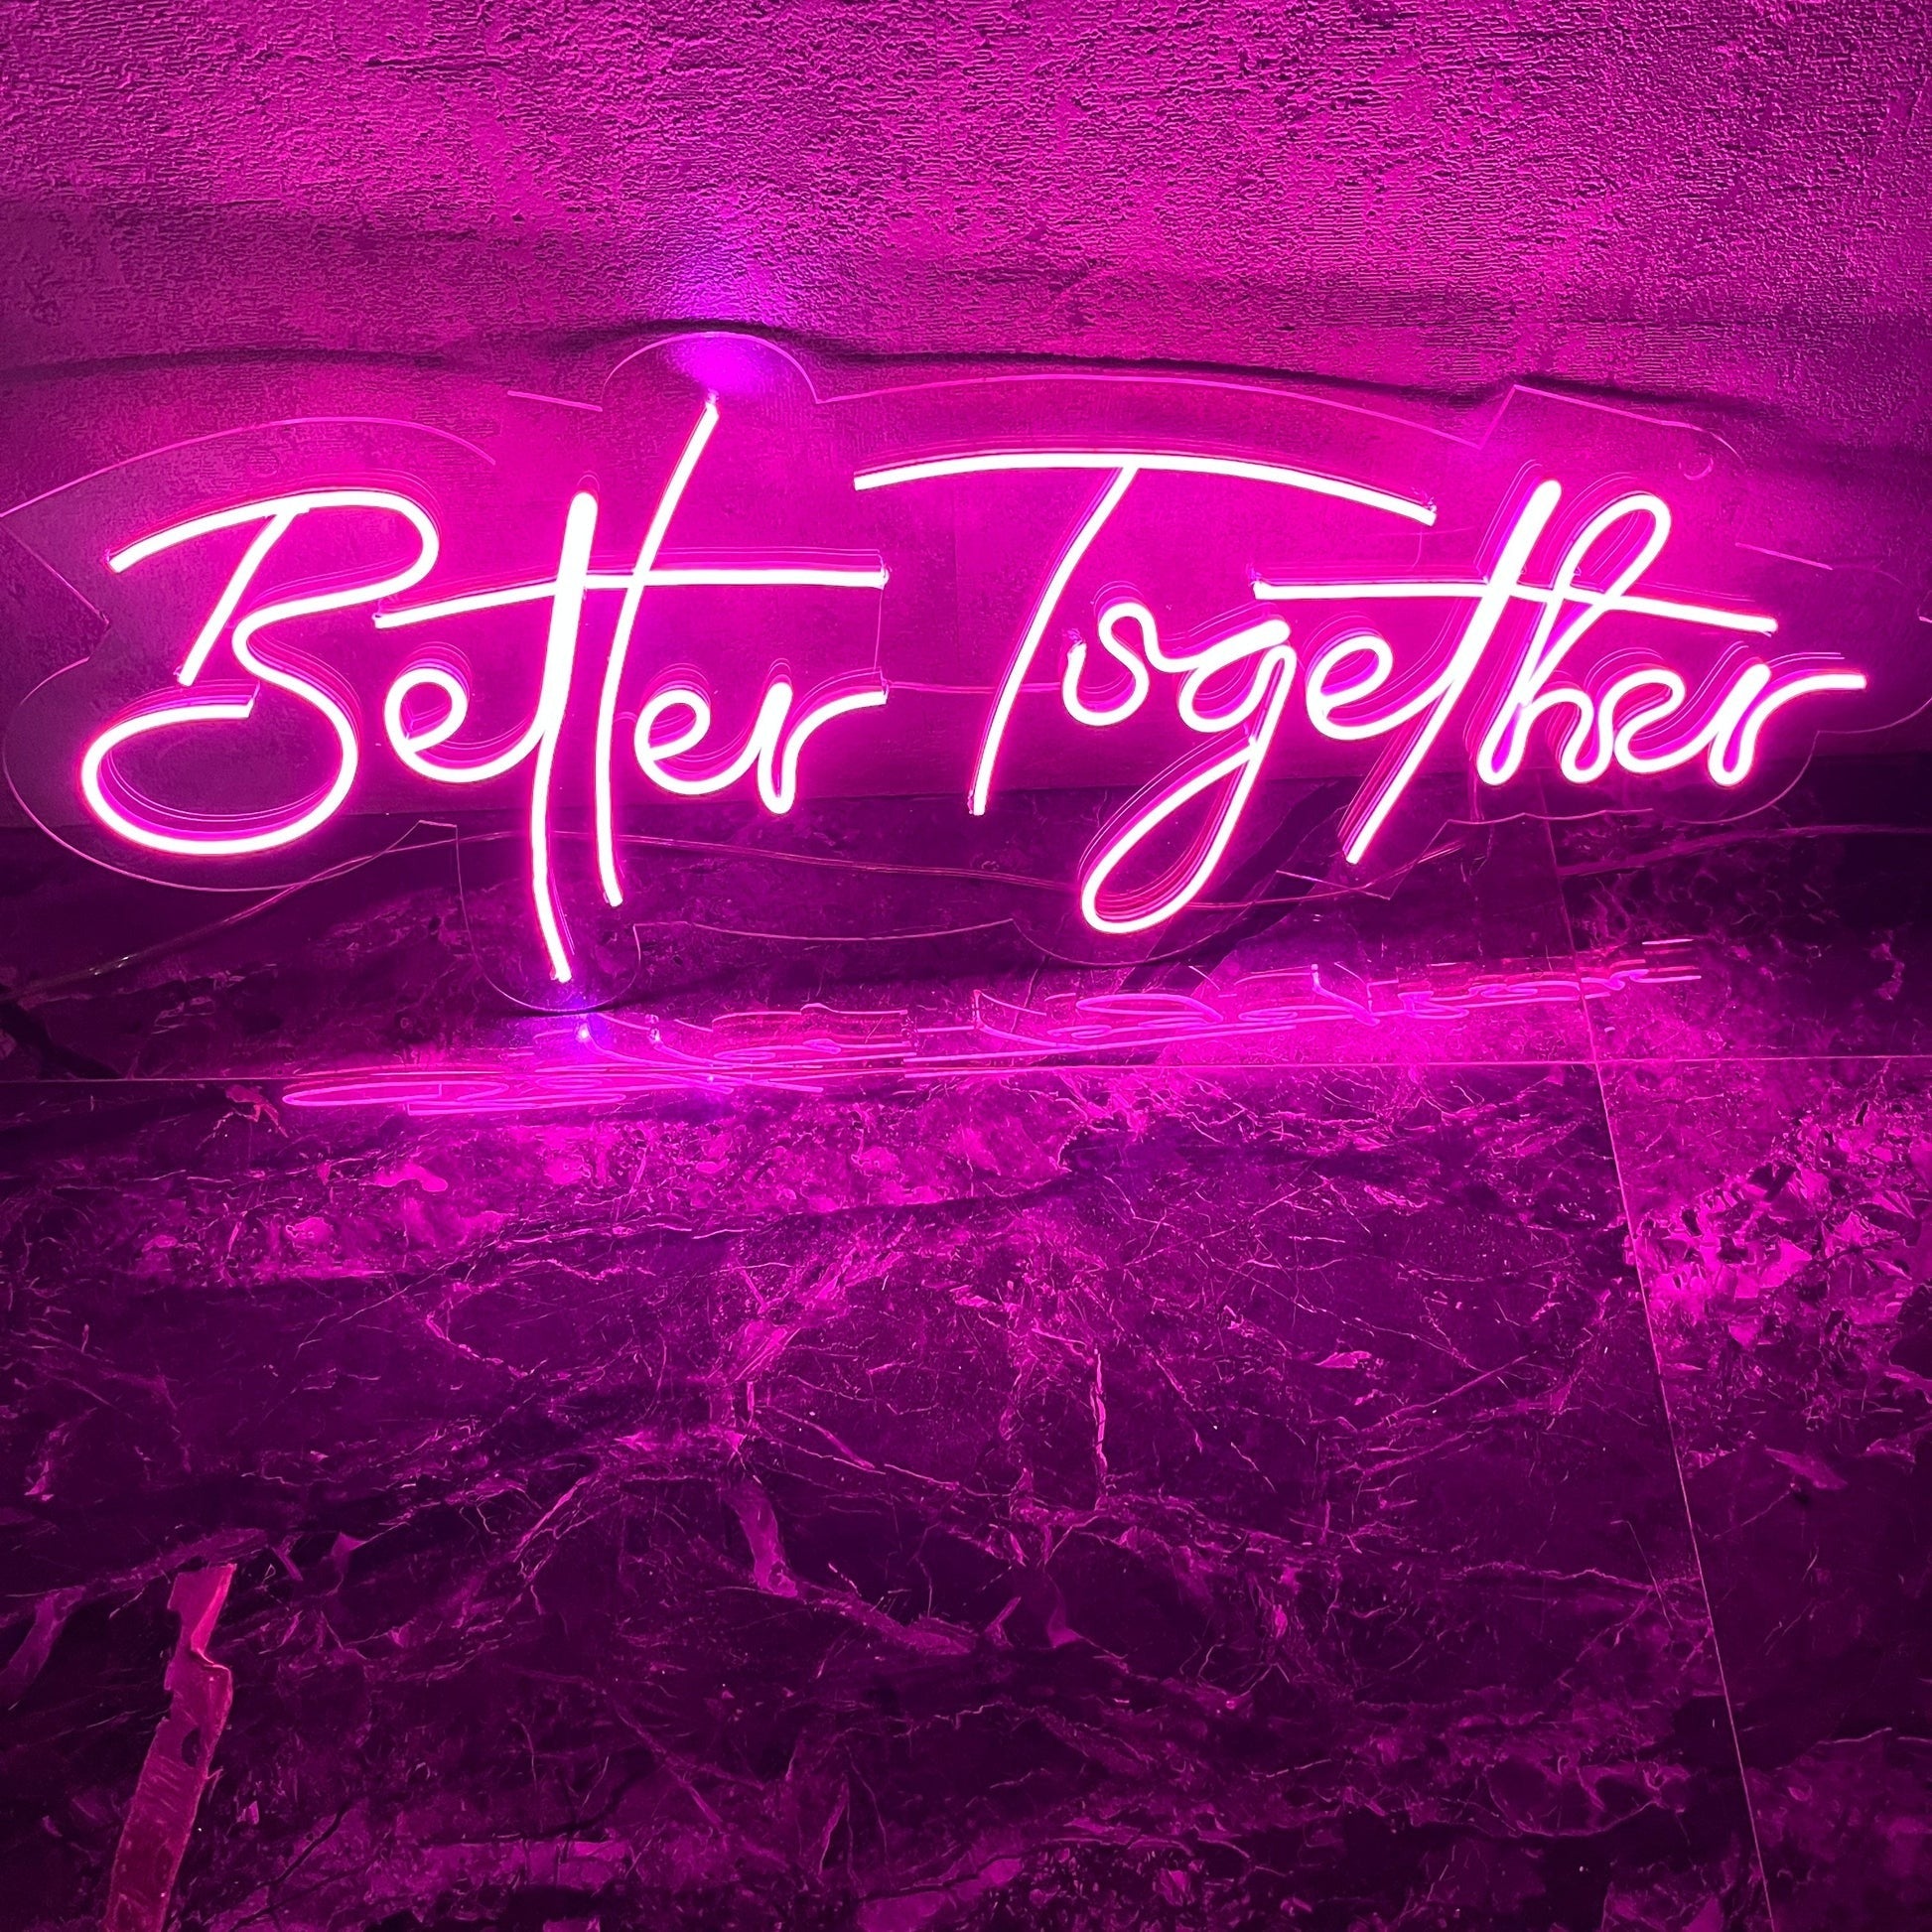 Neon sign "Better Together" with mesmerizing light